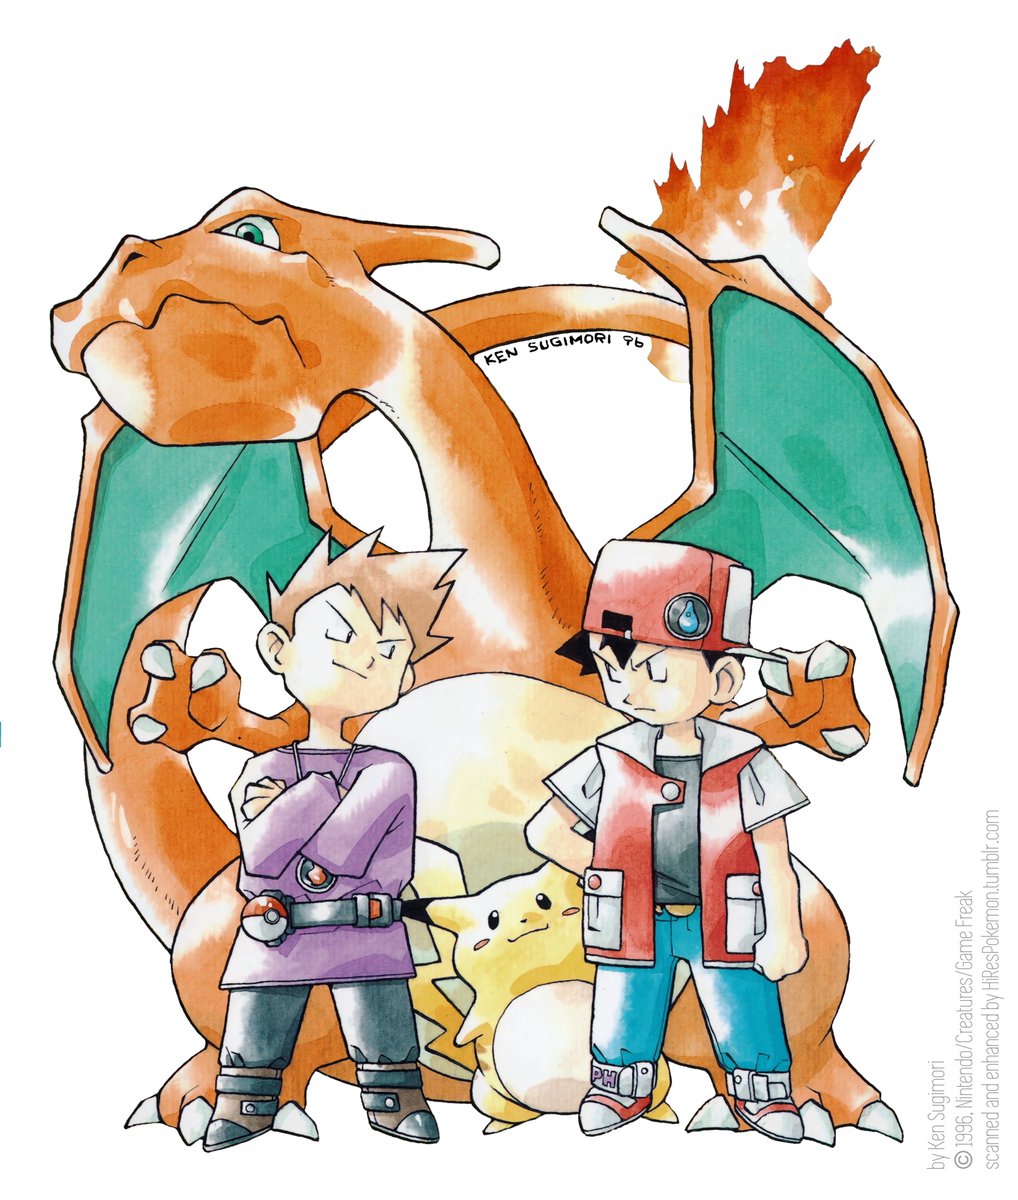 Published on August 1996 on the cover of 'Pokémon 4Koma DX', by K...